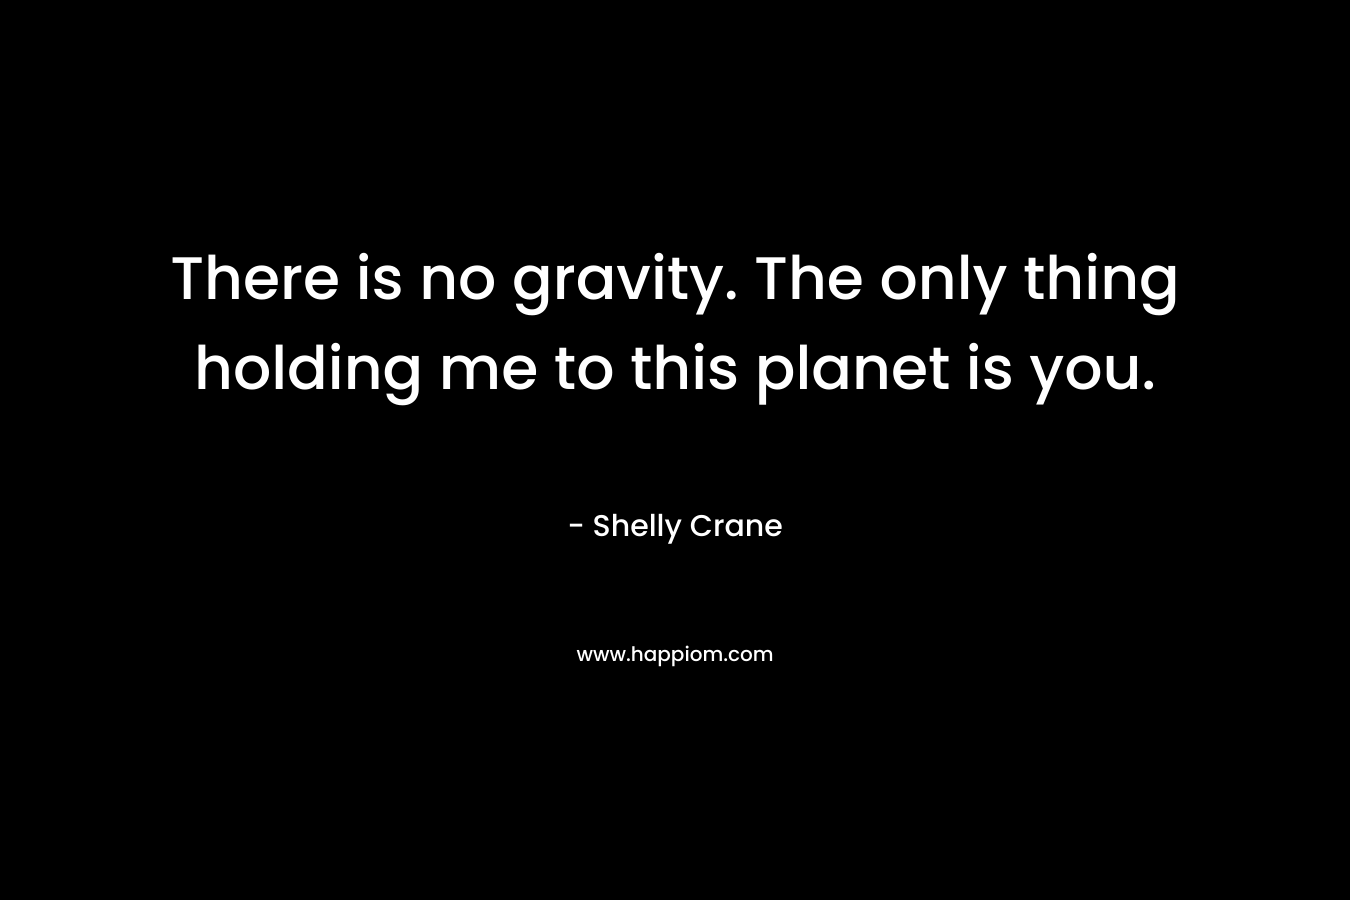 There is no gravity. The only thing holding me to this planet is you. – Shelly Crane